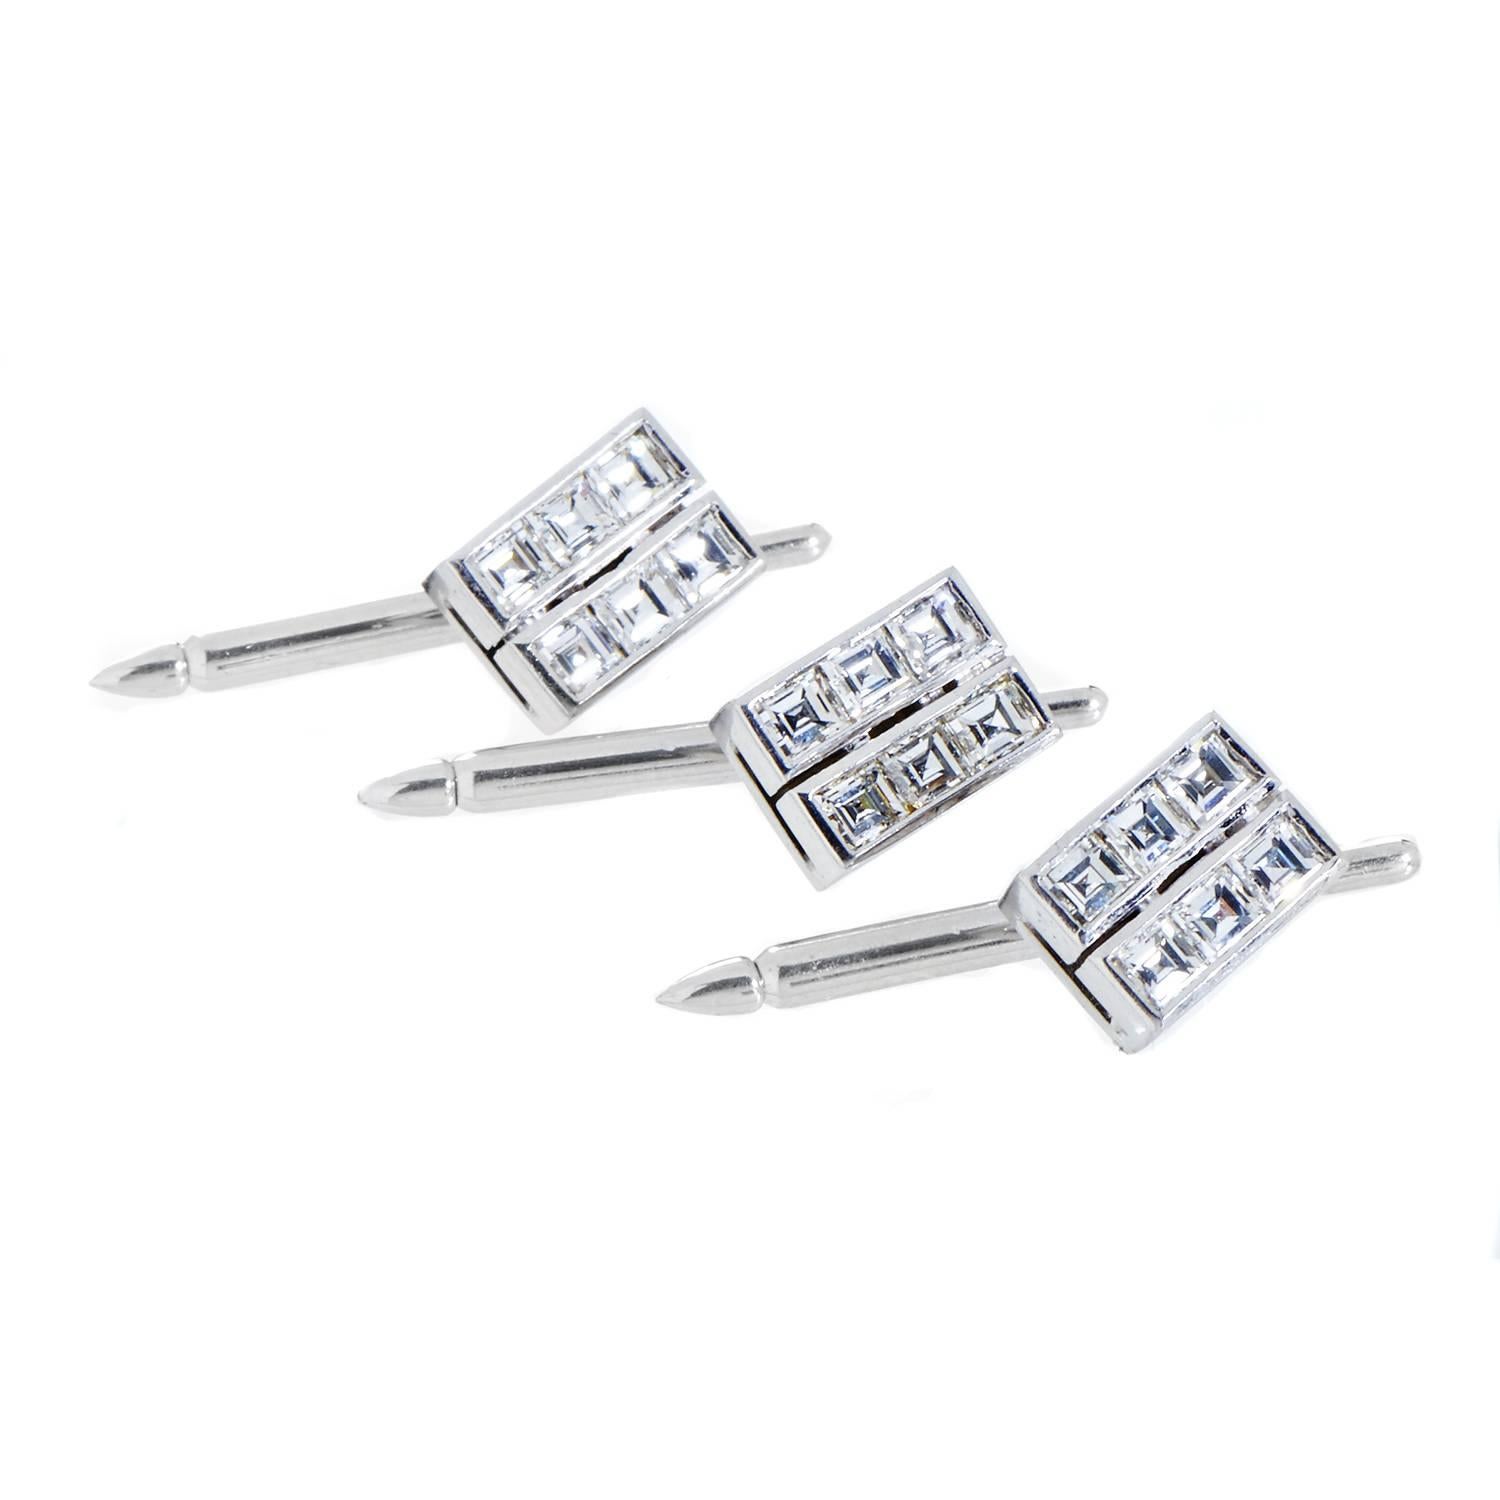 The neat shape and resplendent G-color diamonds of VS clarity weighing in total approximately 4.50 carats provide striking allure in this splendid tuxedo set comprised of cufflinks and three shirt pins, made of gleaming 18K white gold and offering